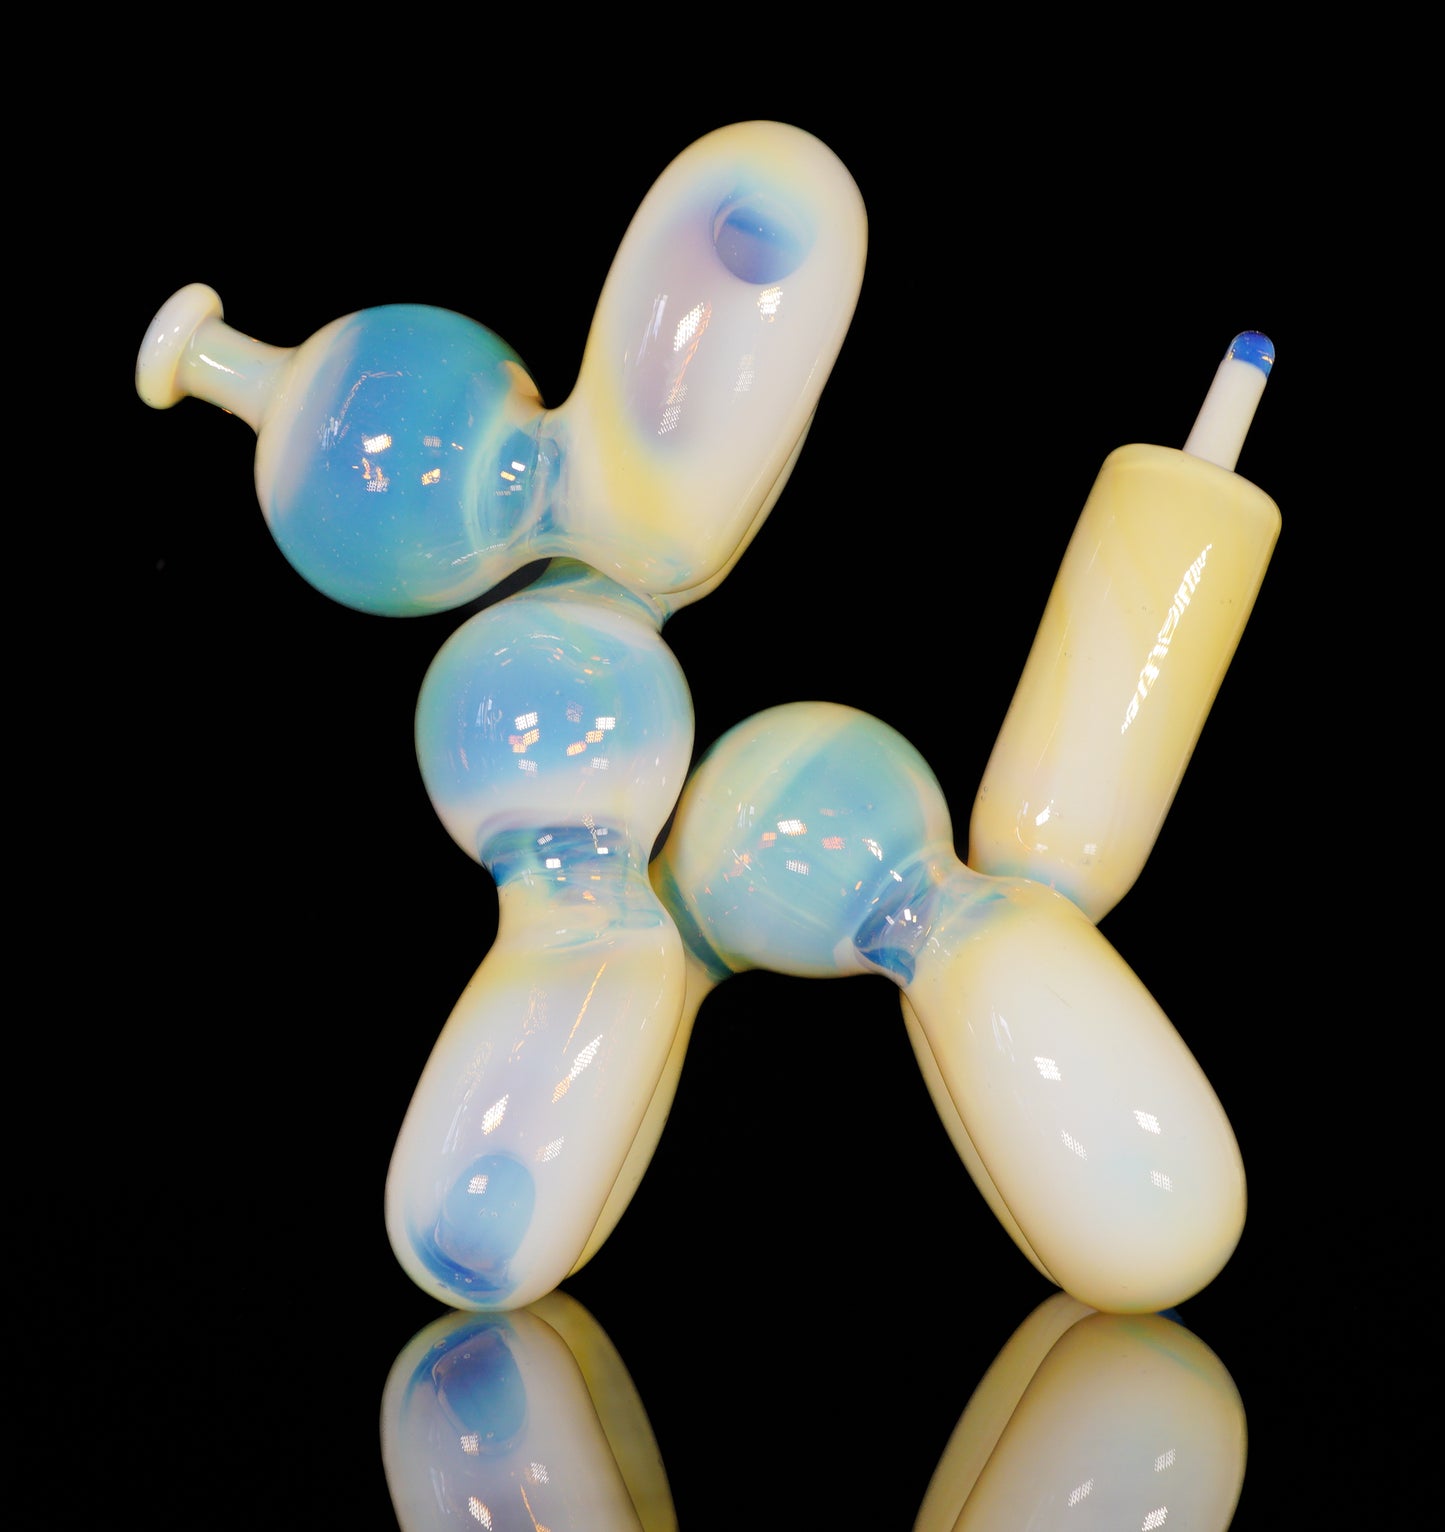 Northstar Yellow over Lucid Balloon Dog + Removable Tail